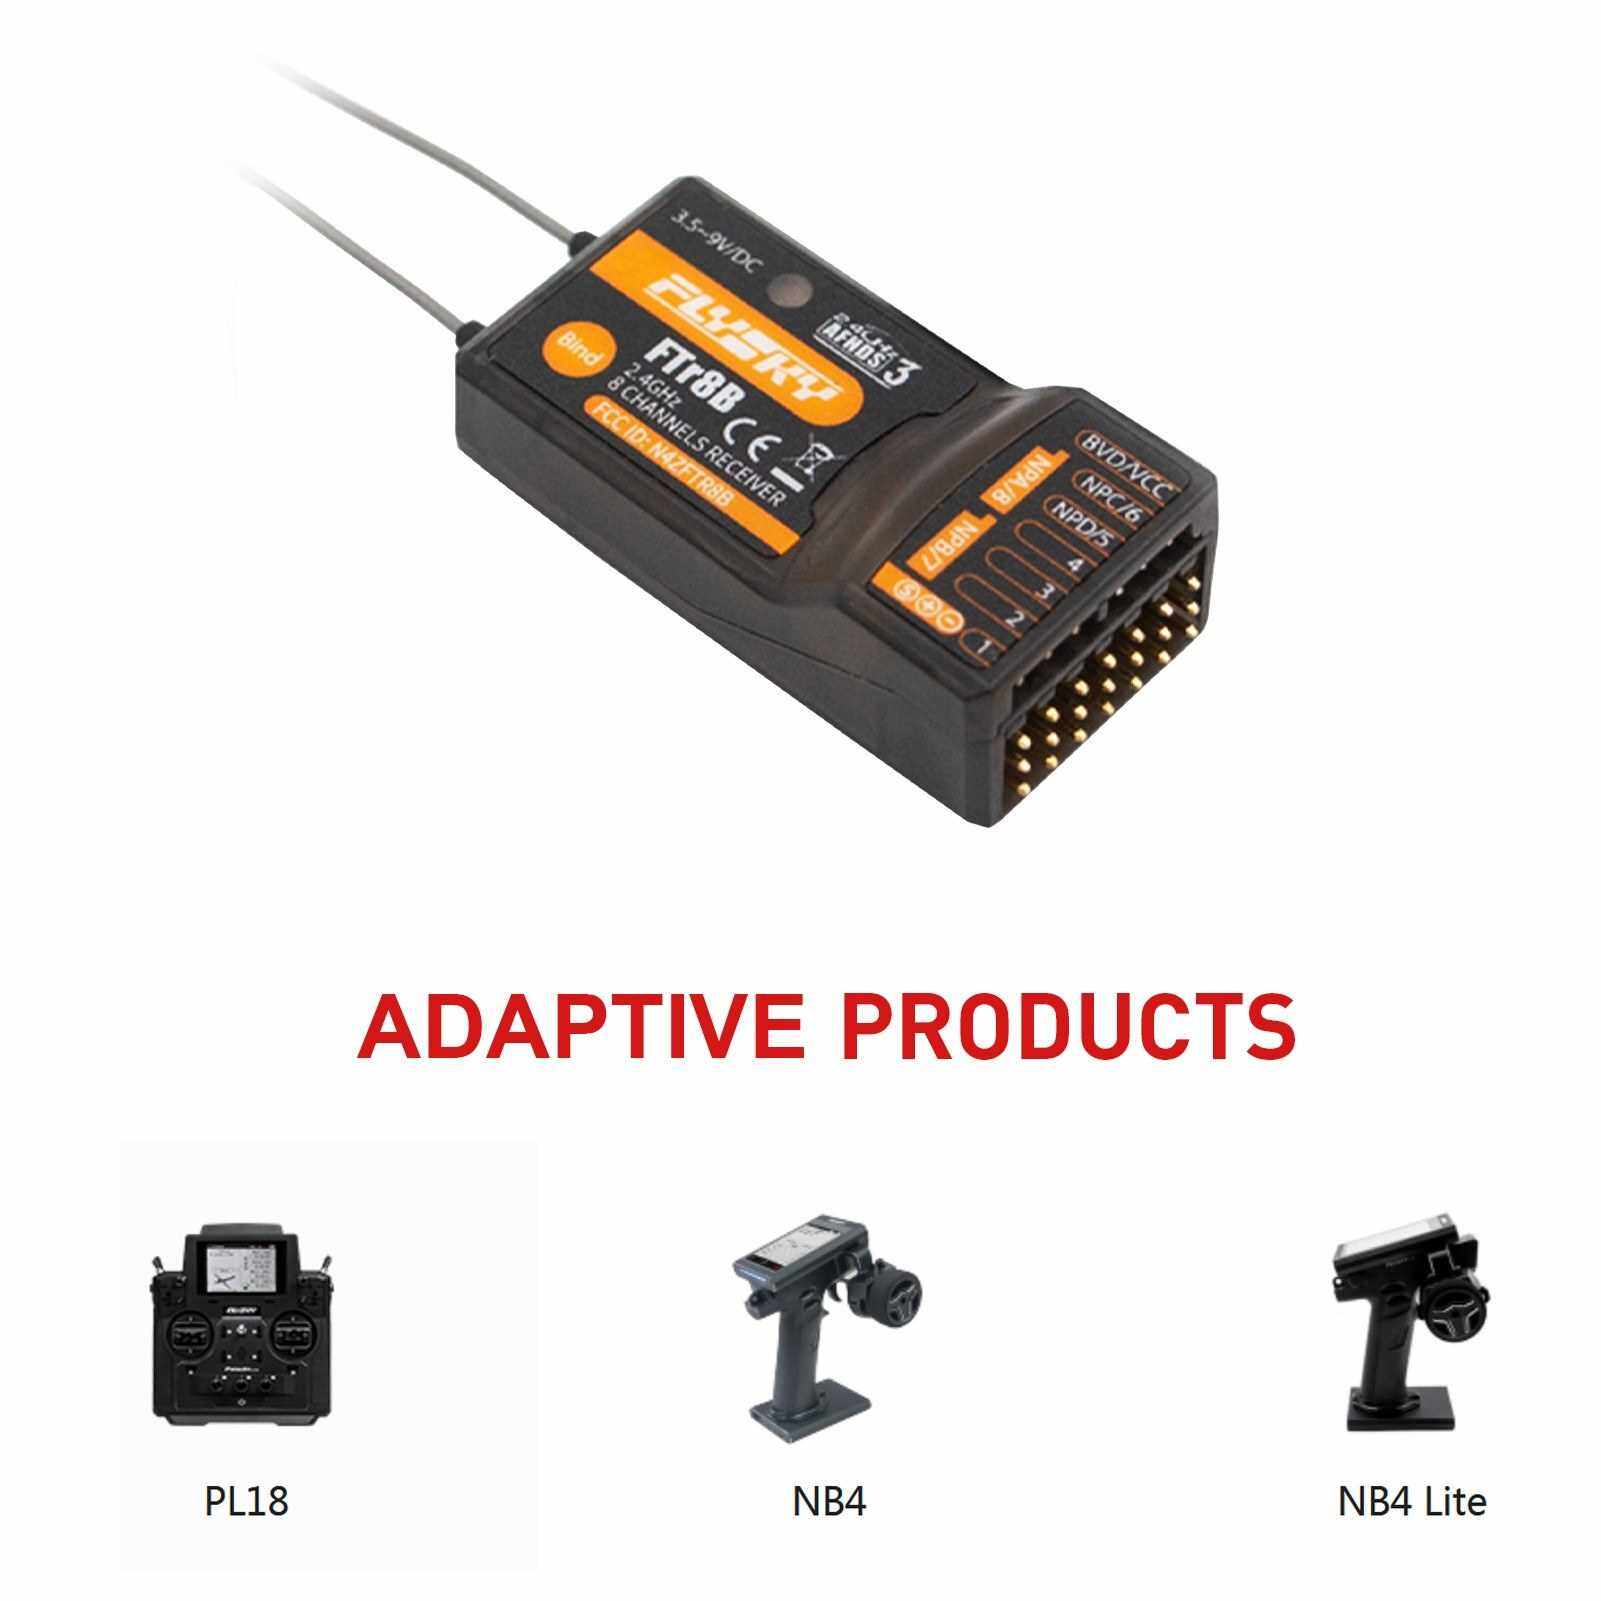 FlySky FTr8B 2.4GHz 8CH Receiver for RC Airplane Helicopter Fixed Wing Glider Engineering Vehicle Drone Dual Antenna PWM/PPM/i.BUS/S.BUS Output Compatible with AFHDS3 Transmitters RF Modules PL18 NB4 (Standard)